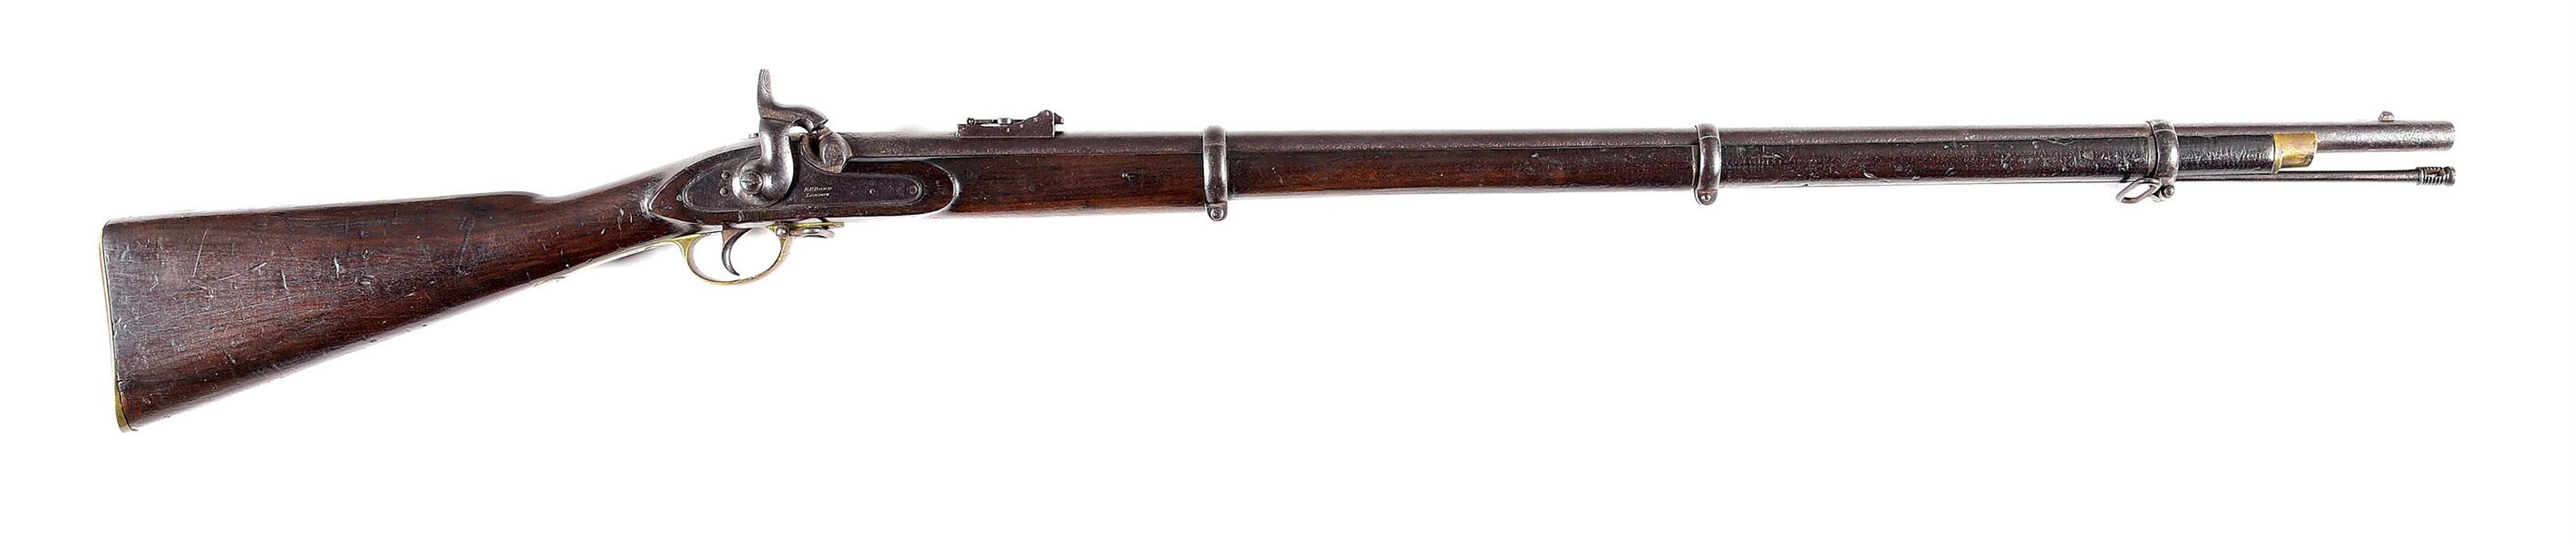 (A) RARE CONFEDERATE IMPORTED AND NUMBERED P-53 ENFIELD MUSKET BY BOND.